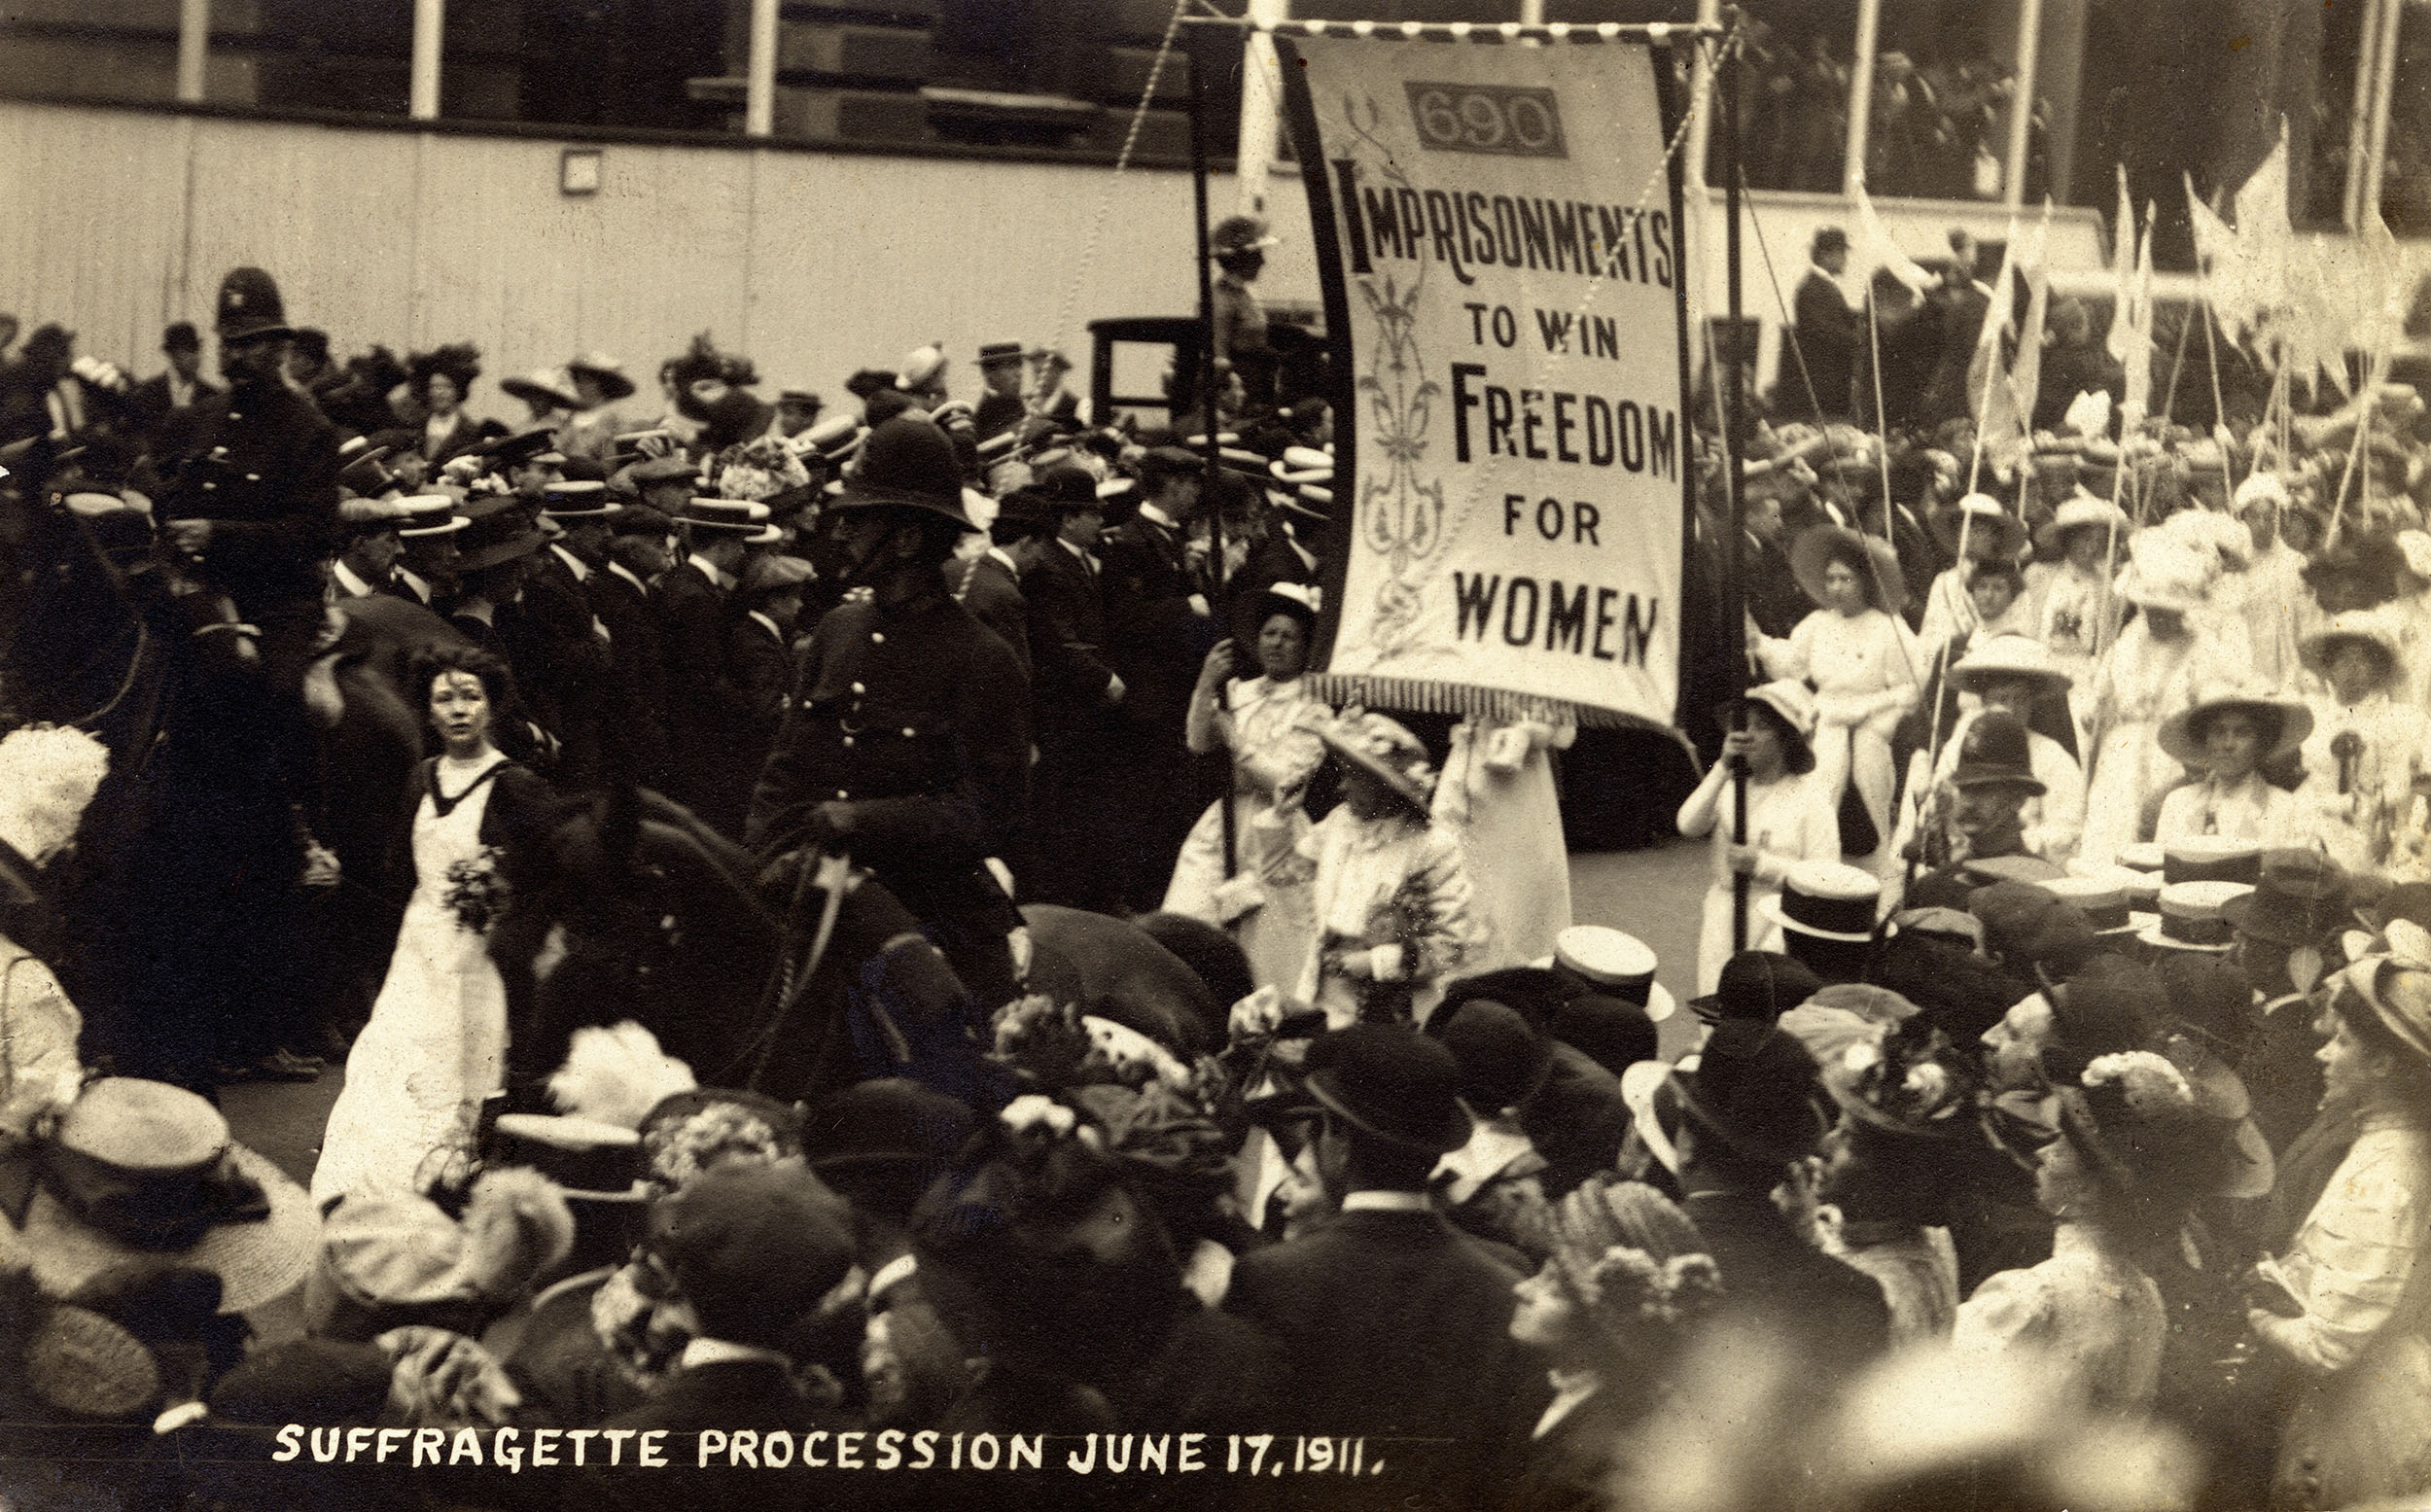 Image of a Suffragette Procession on 17 June 1911.